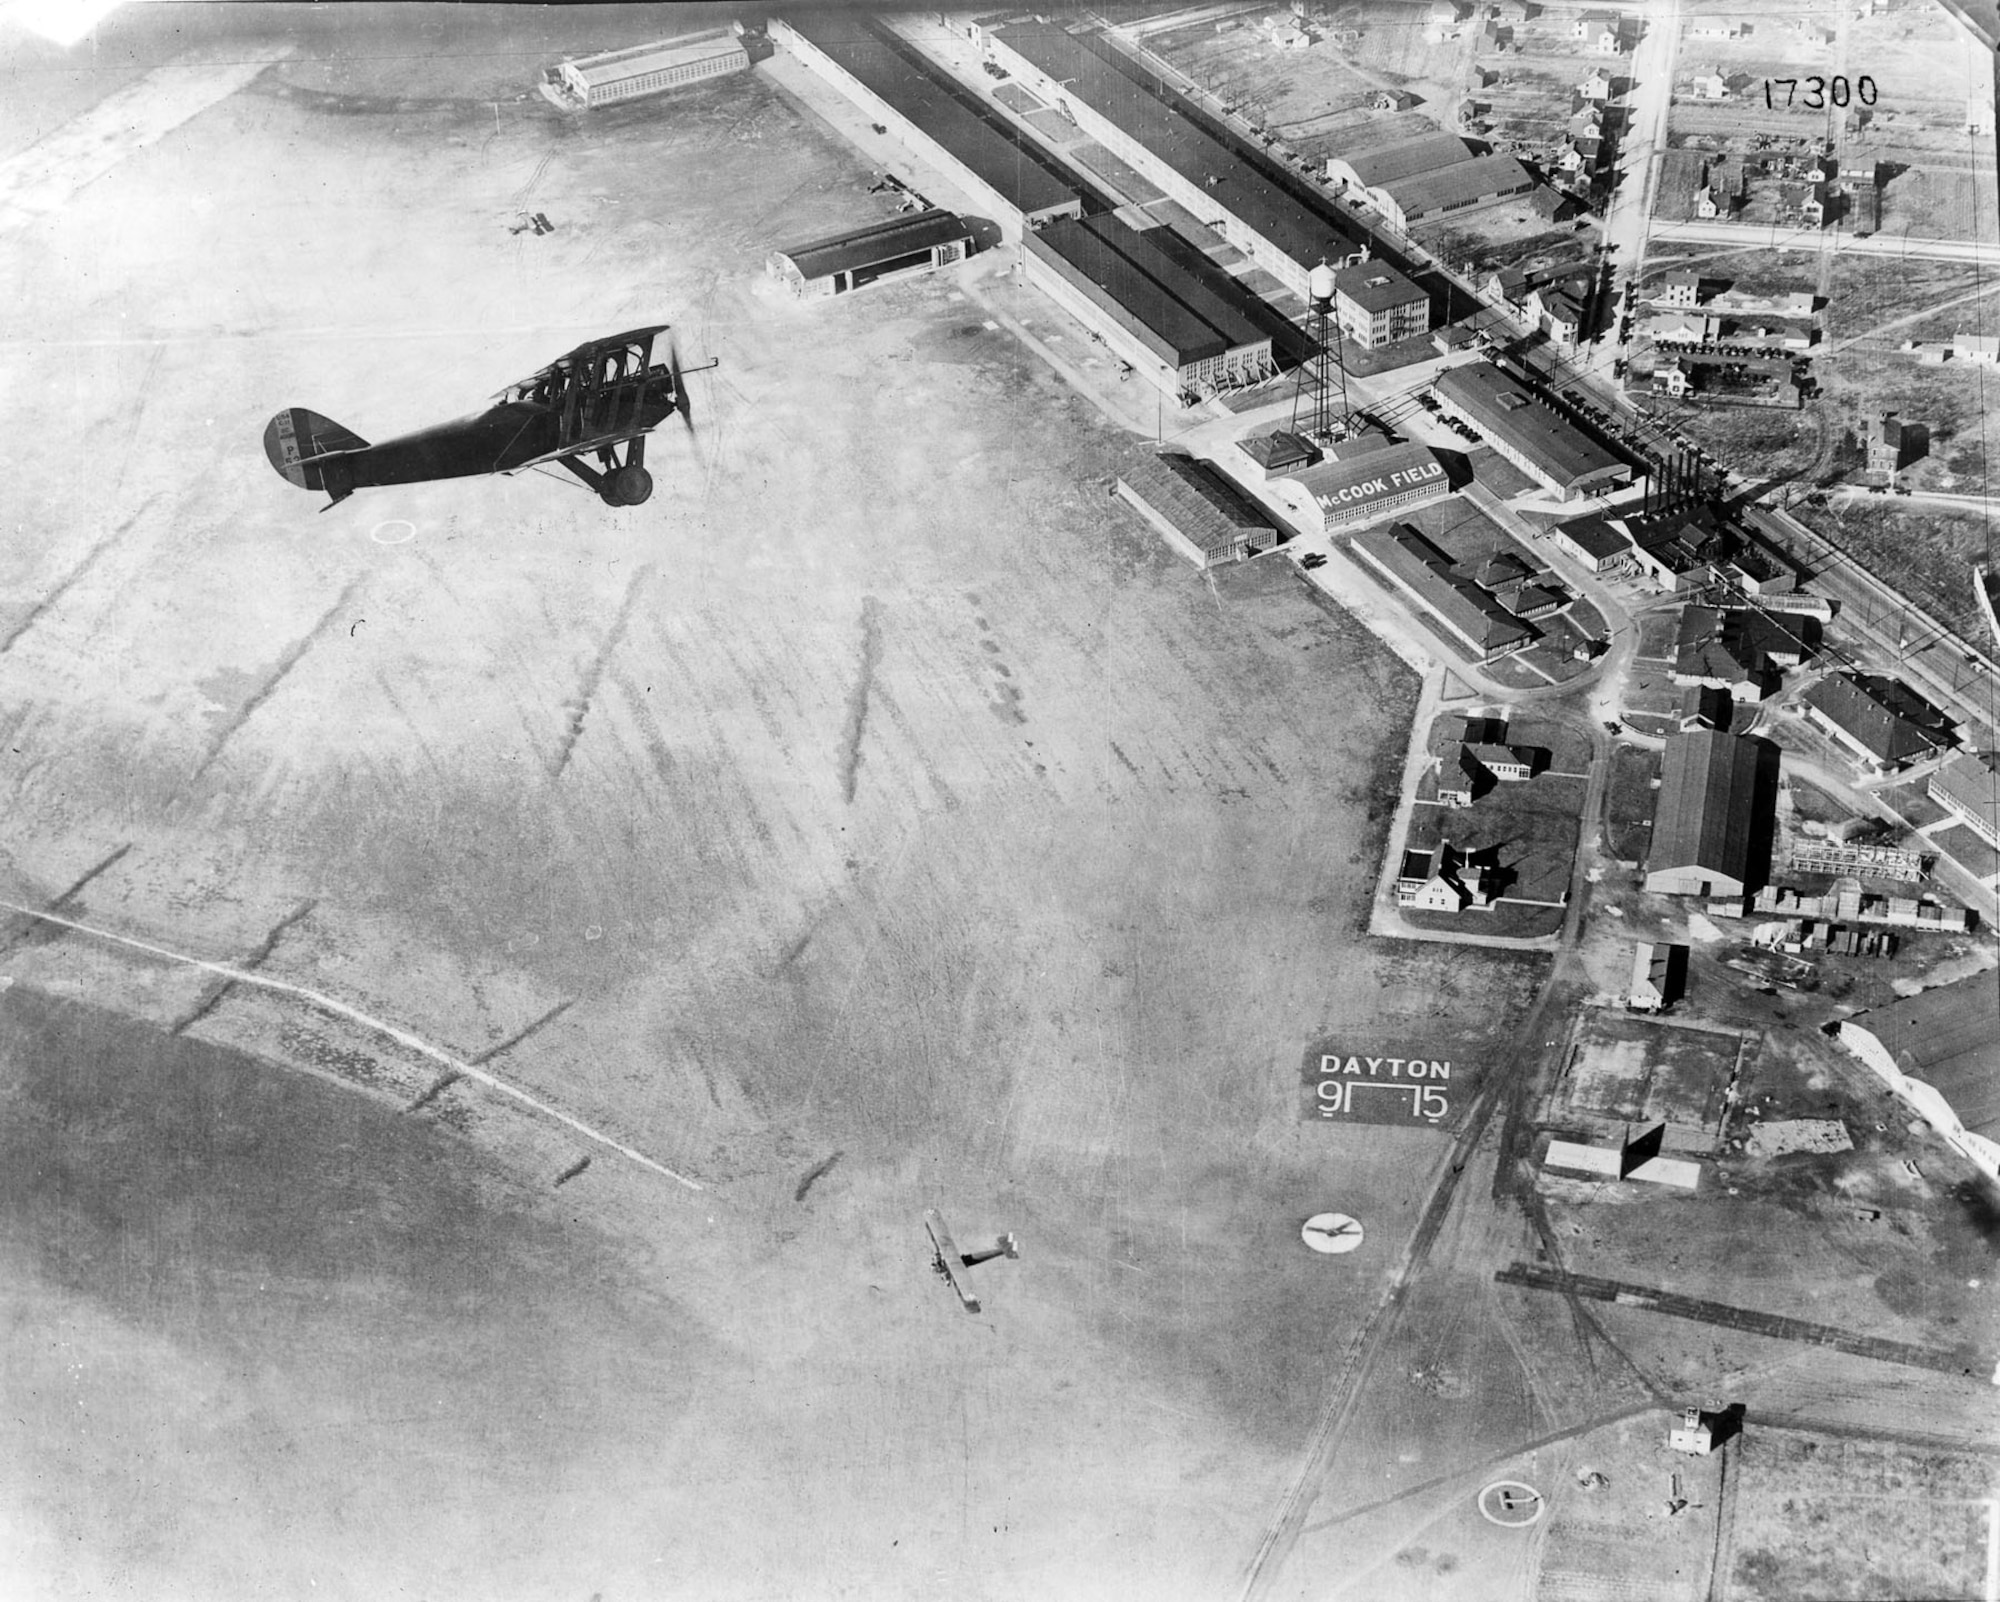 LUSAC-11 over McCook Field. This airplane (P-53) was flown by Lt. Rudolph "Shorty" Schroerder when he set new solo and two-man world altitude records in 1919 and 1920. (U.S. Air Force photo)